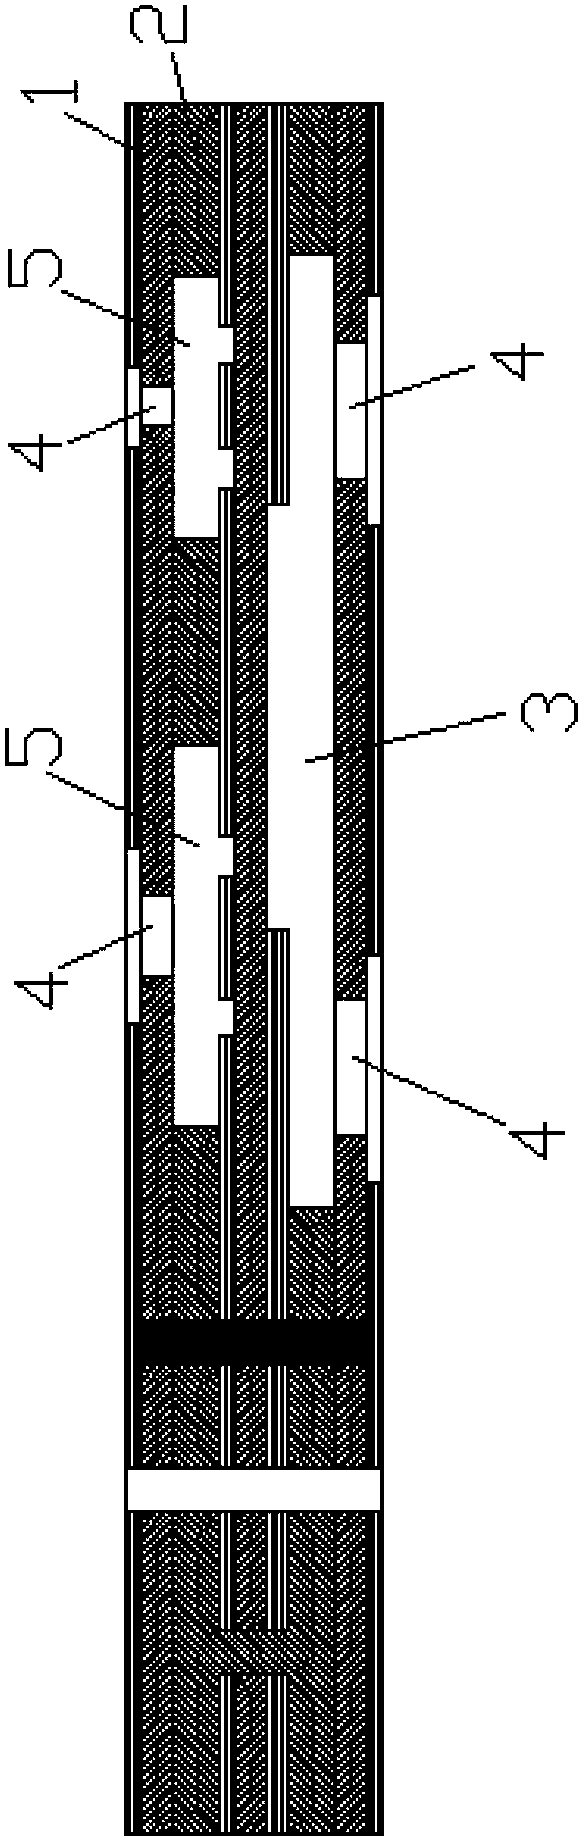 Internally-embedded cavity-based multi-layer printed board structure